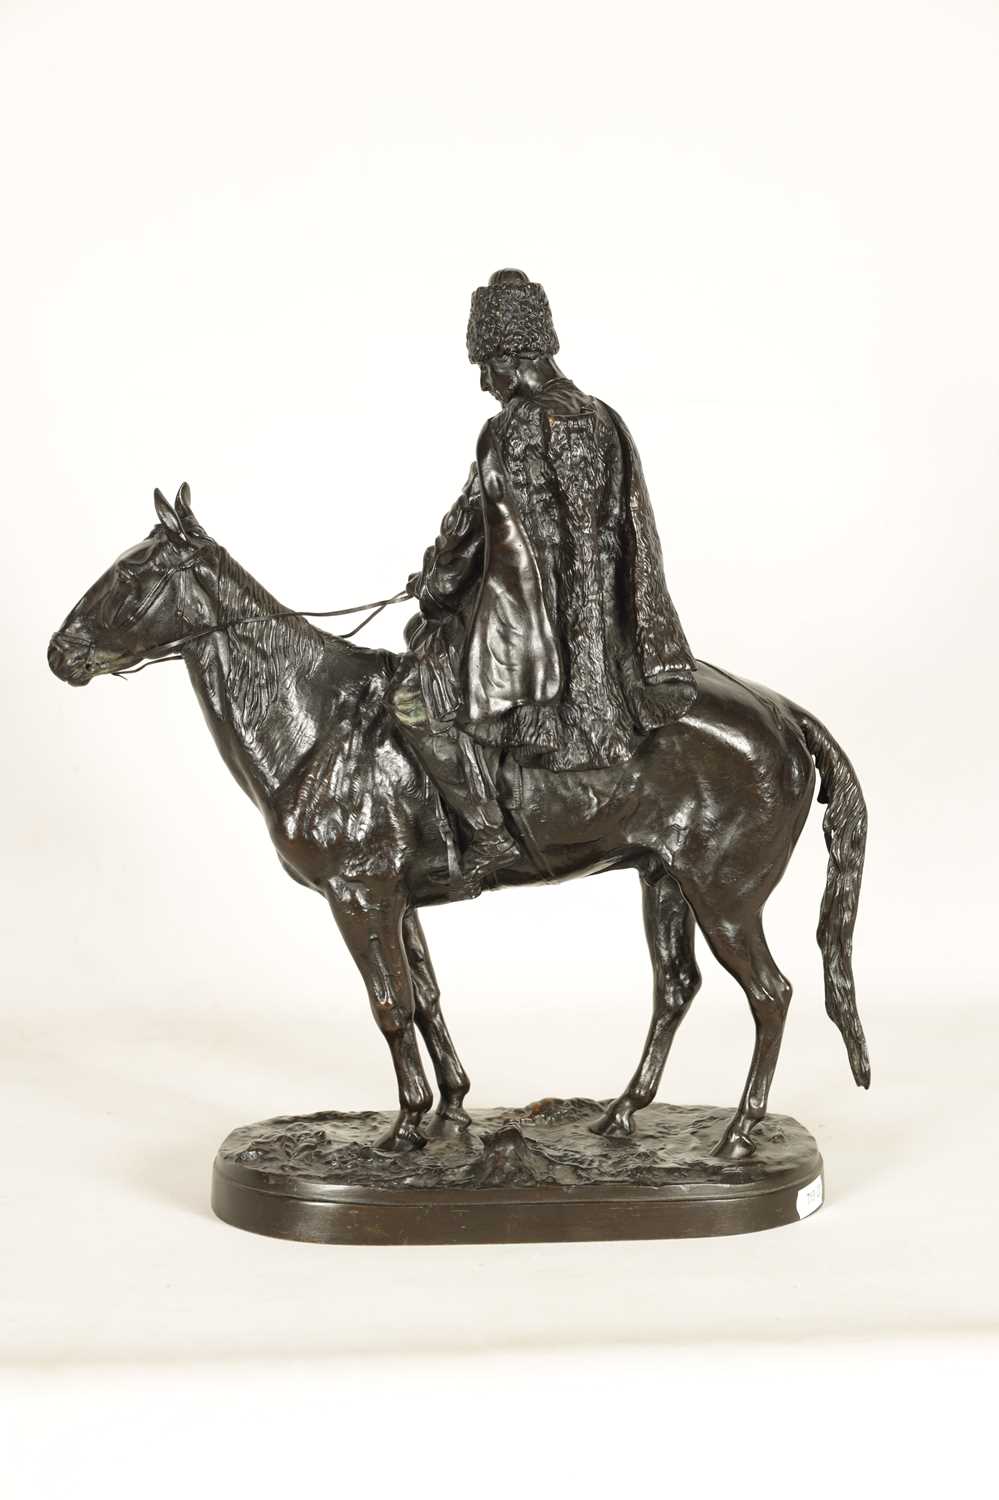 E. NAHCEPE. A LATE 19TH CENTURY RUSSIAN PATINATED BRONZE SCULPTURE - Image 9 of 21